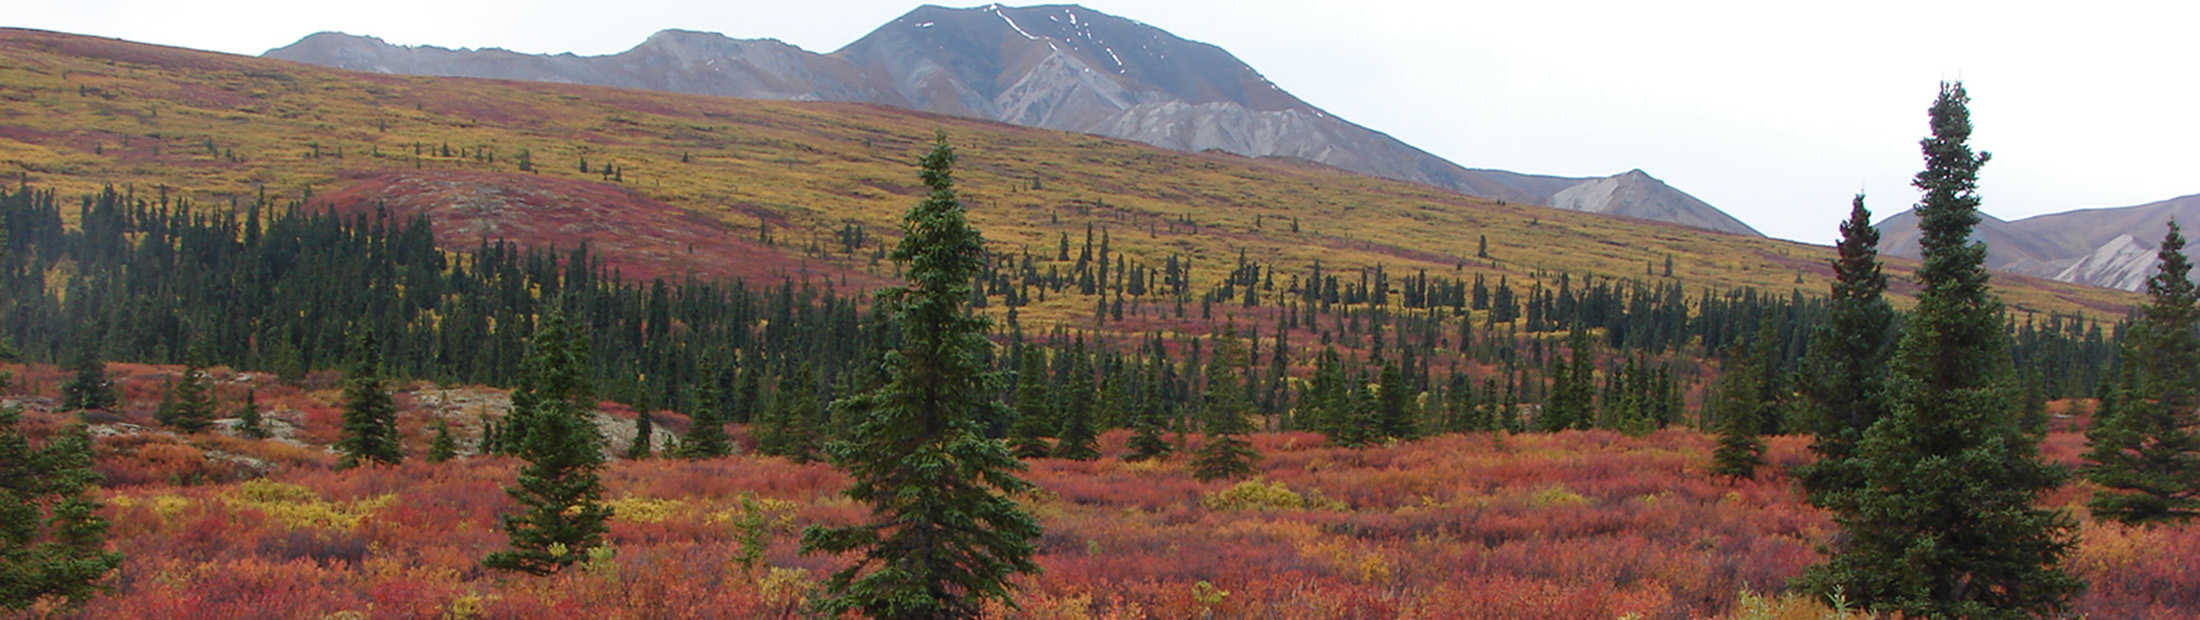 A landscape with red trees covering a plain and mountains in the distance.